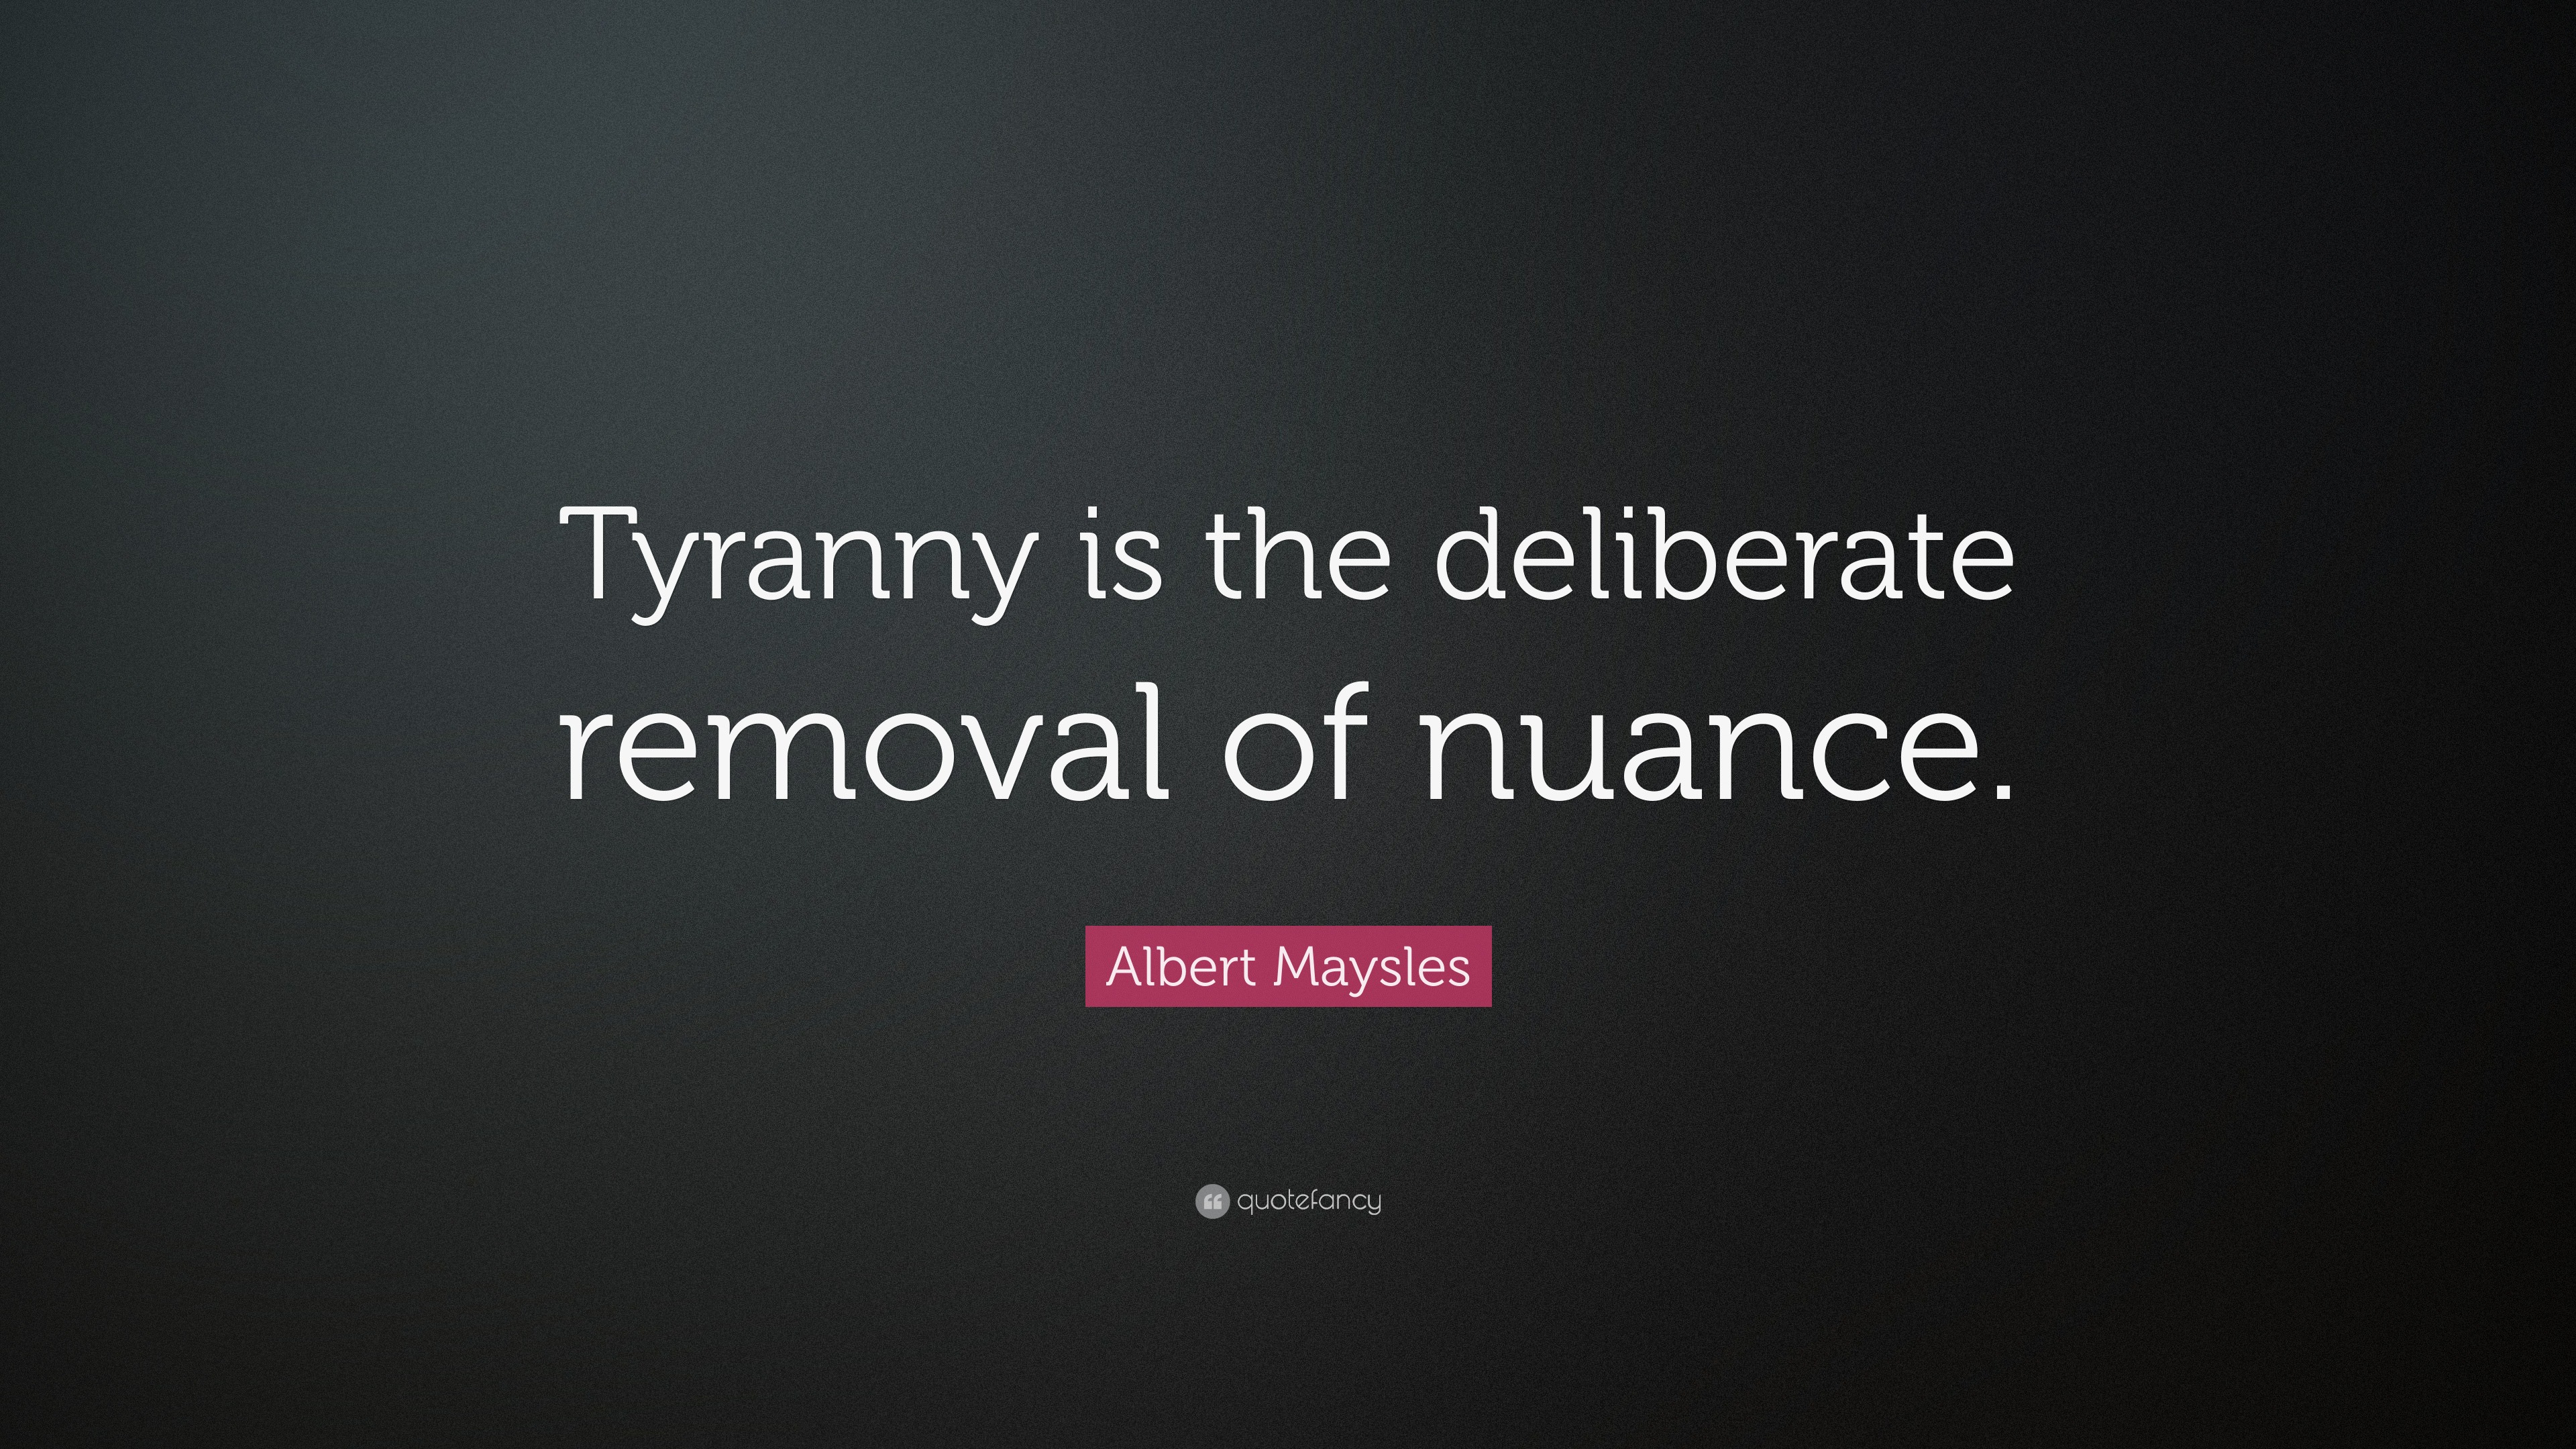 tyranny is the removal of nuance